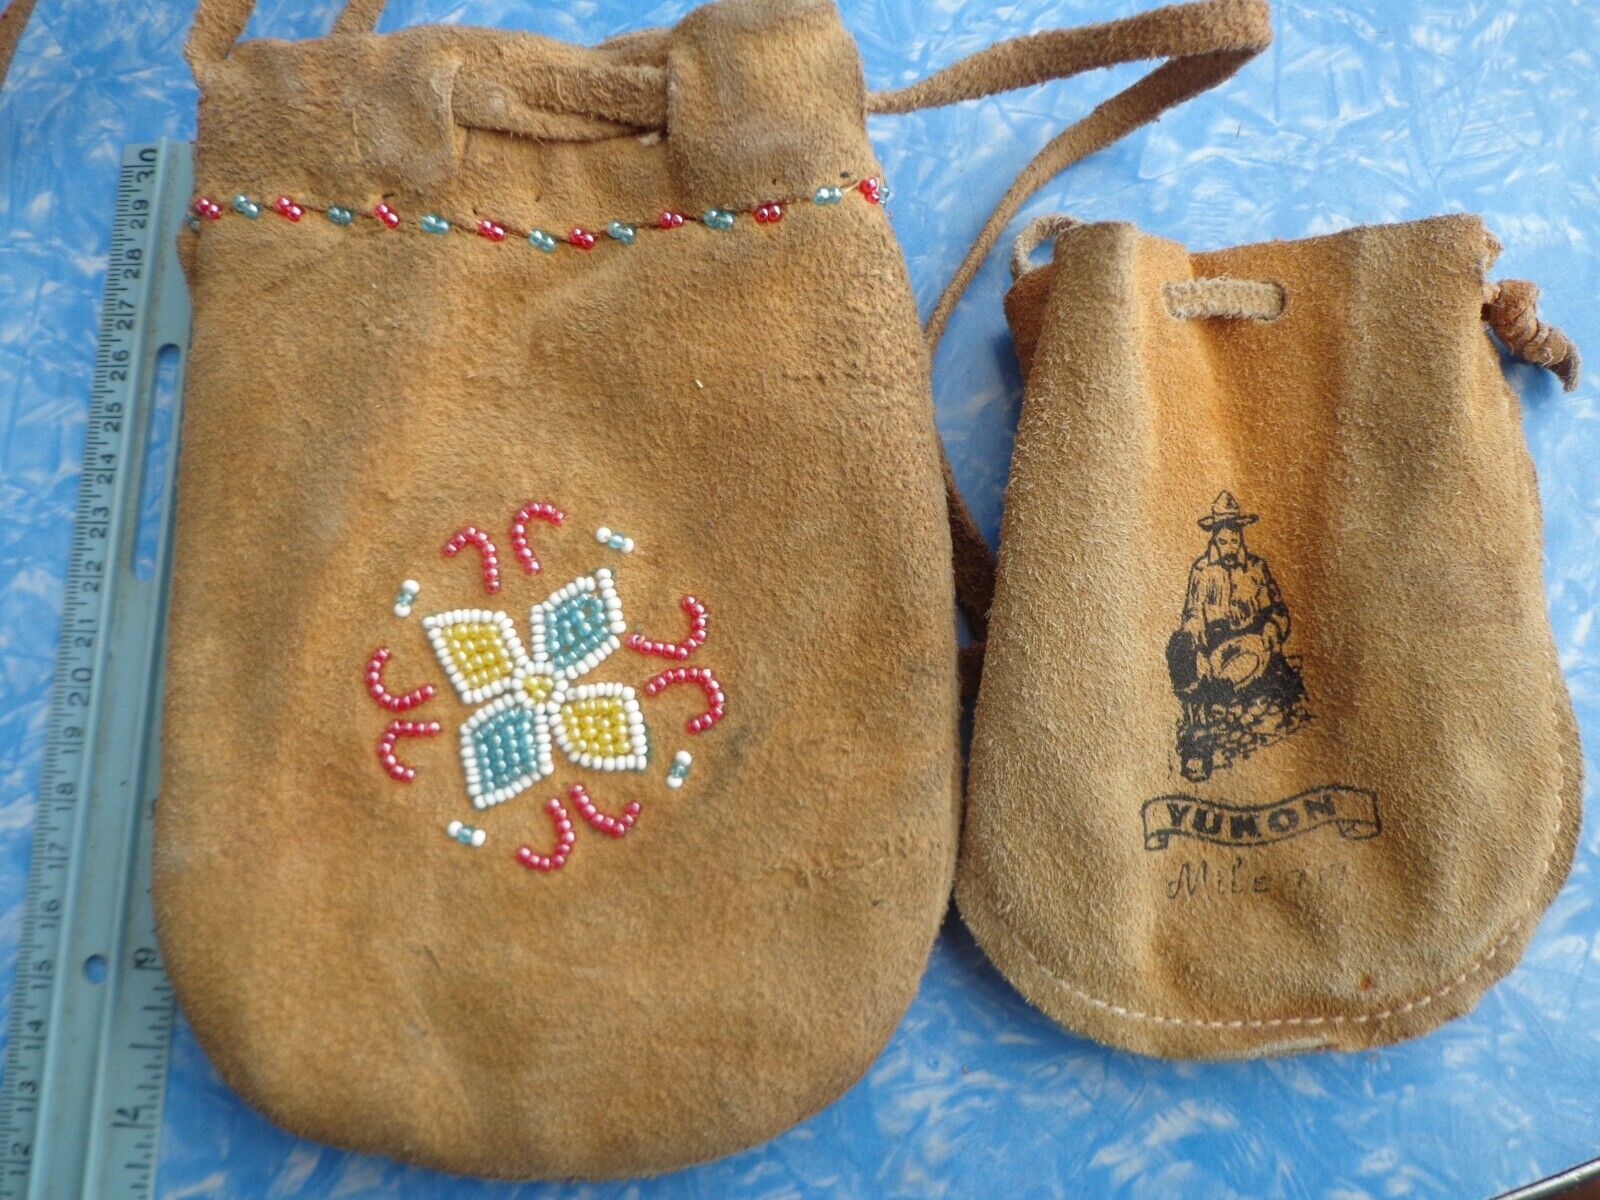 VINTAGE BEADED LEATHER POUCH WITH DRAWSTRING AND YUKON PANNING FOR GOLD